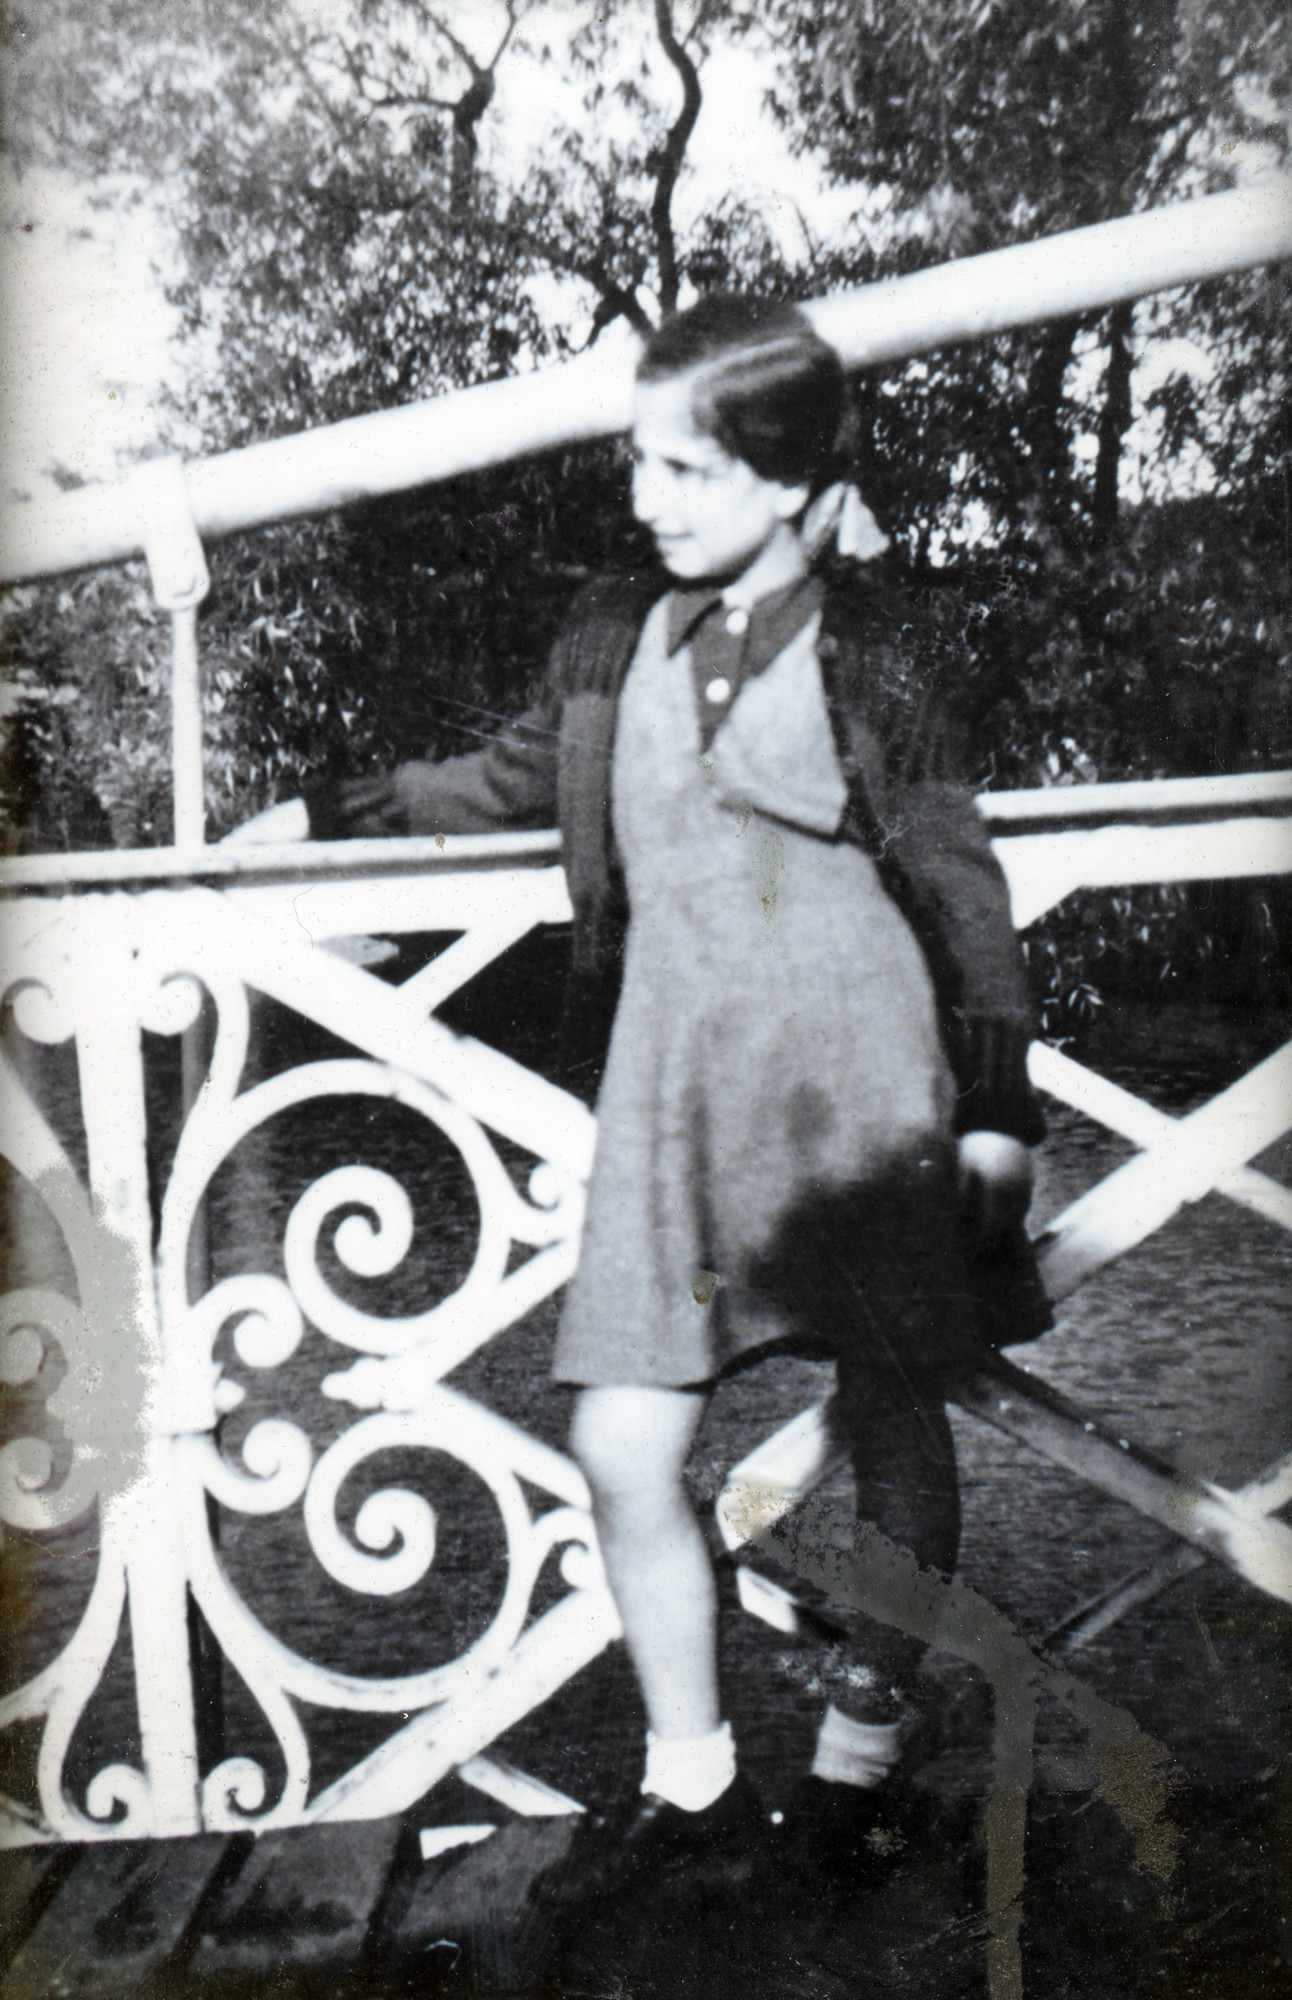 A Belgian Jewish girl leans against an intricate railing. 

Pictured is Adele Bogner (later Judas).